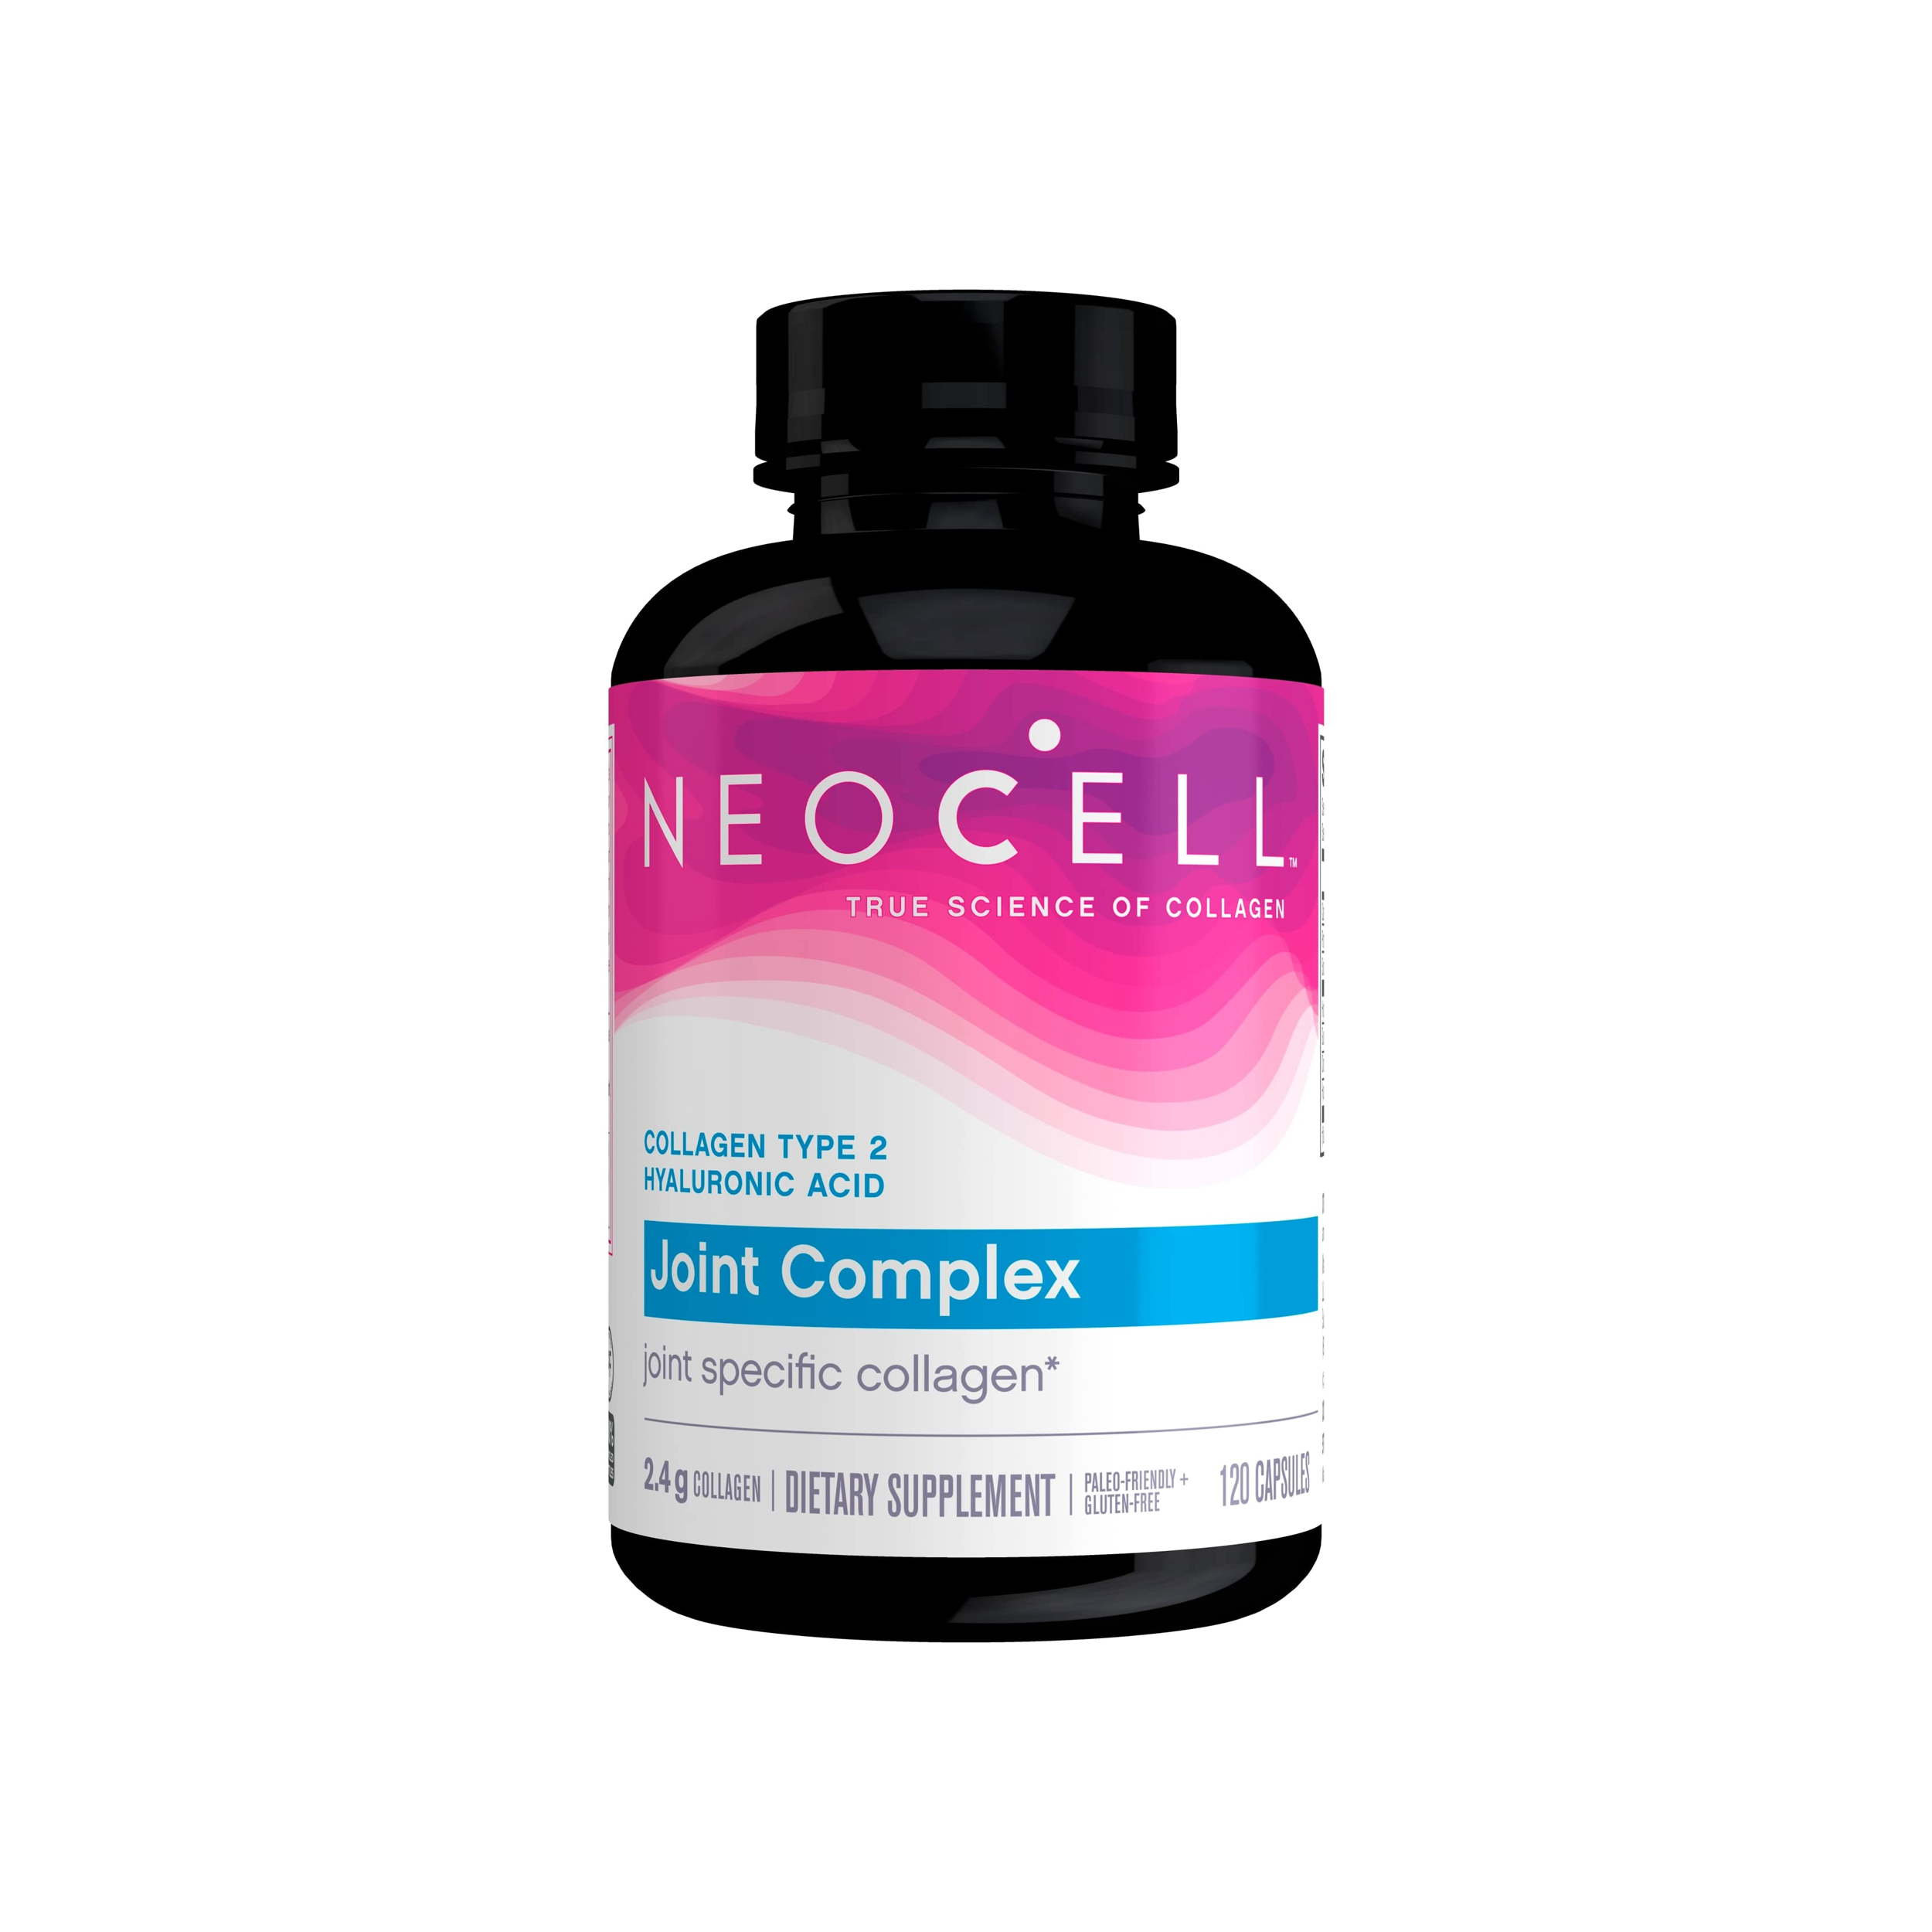 NEOCELL JOINT COMPLEX 120S